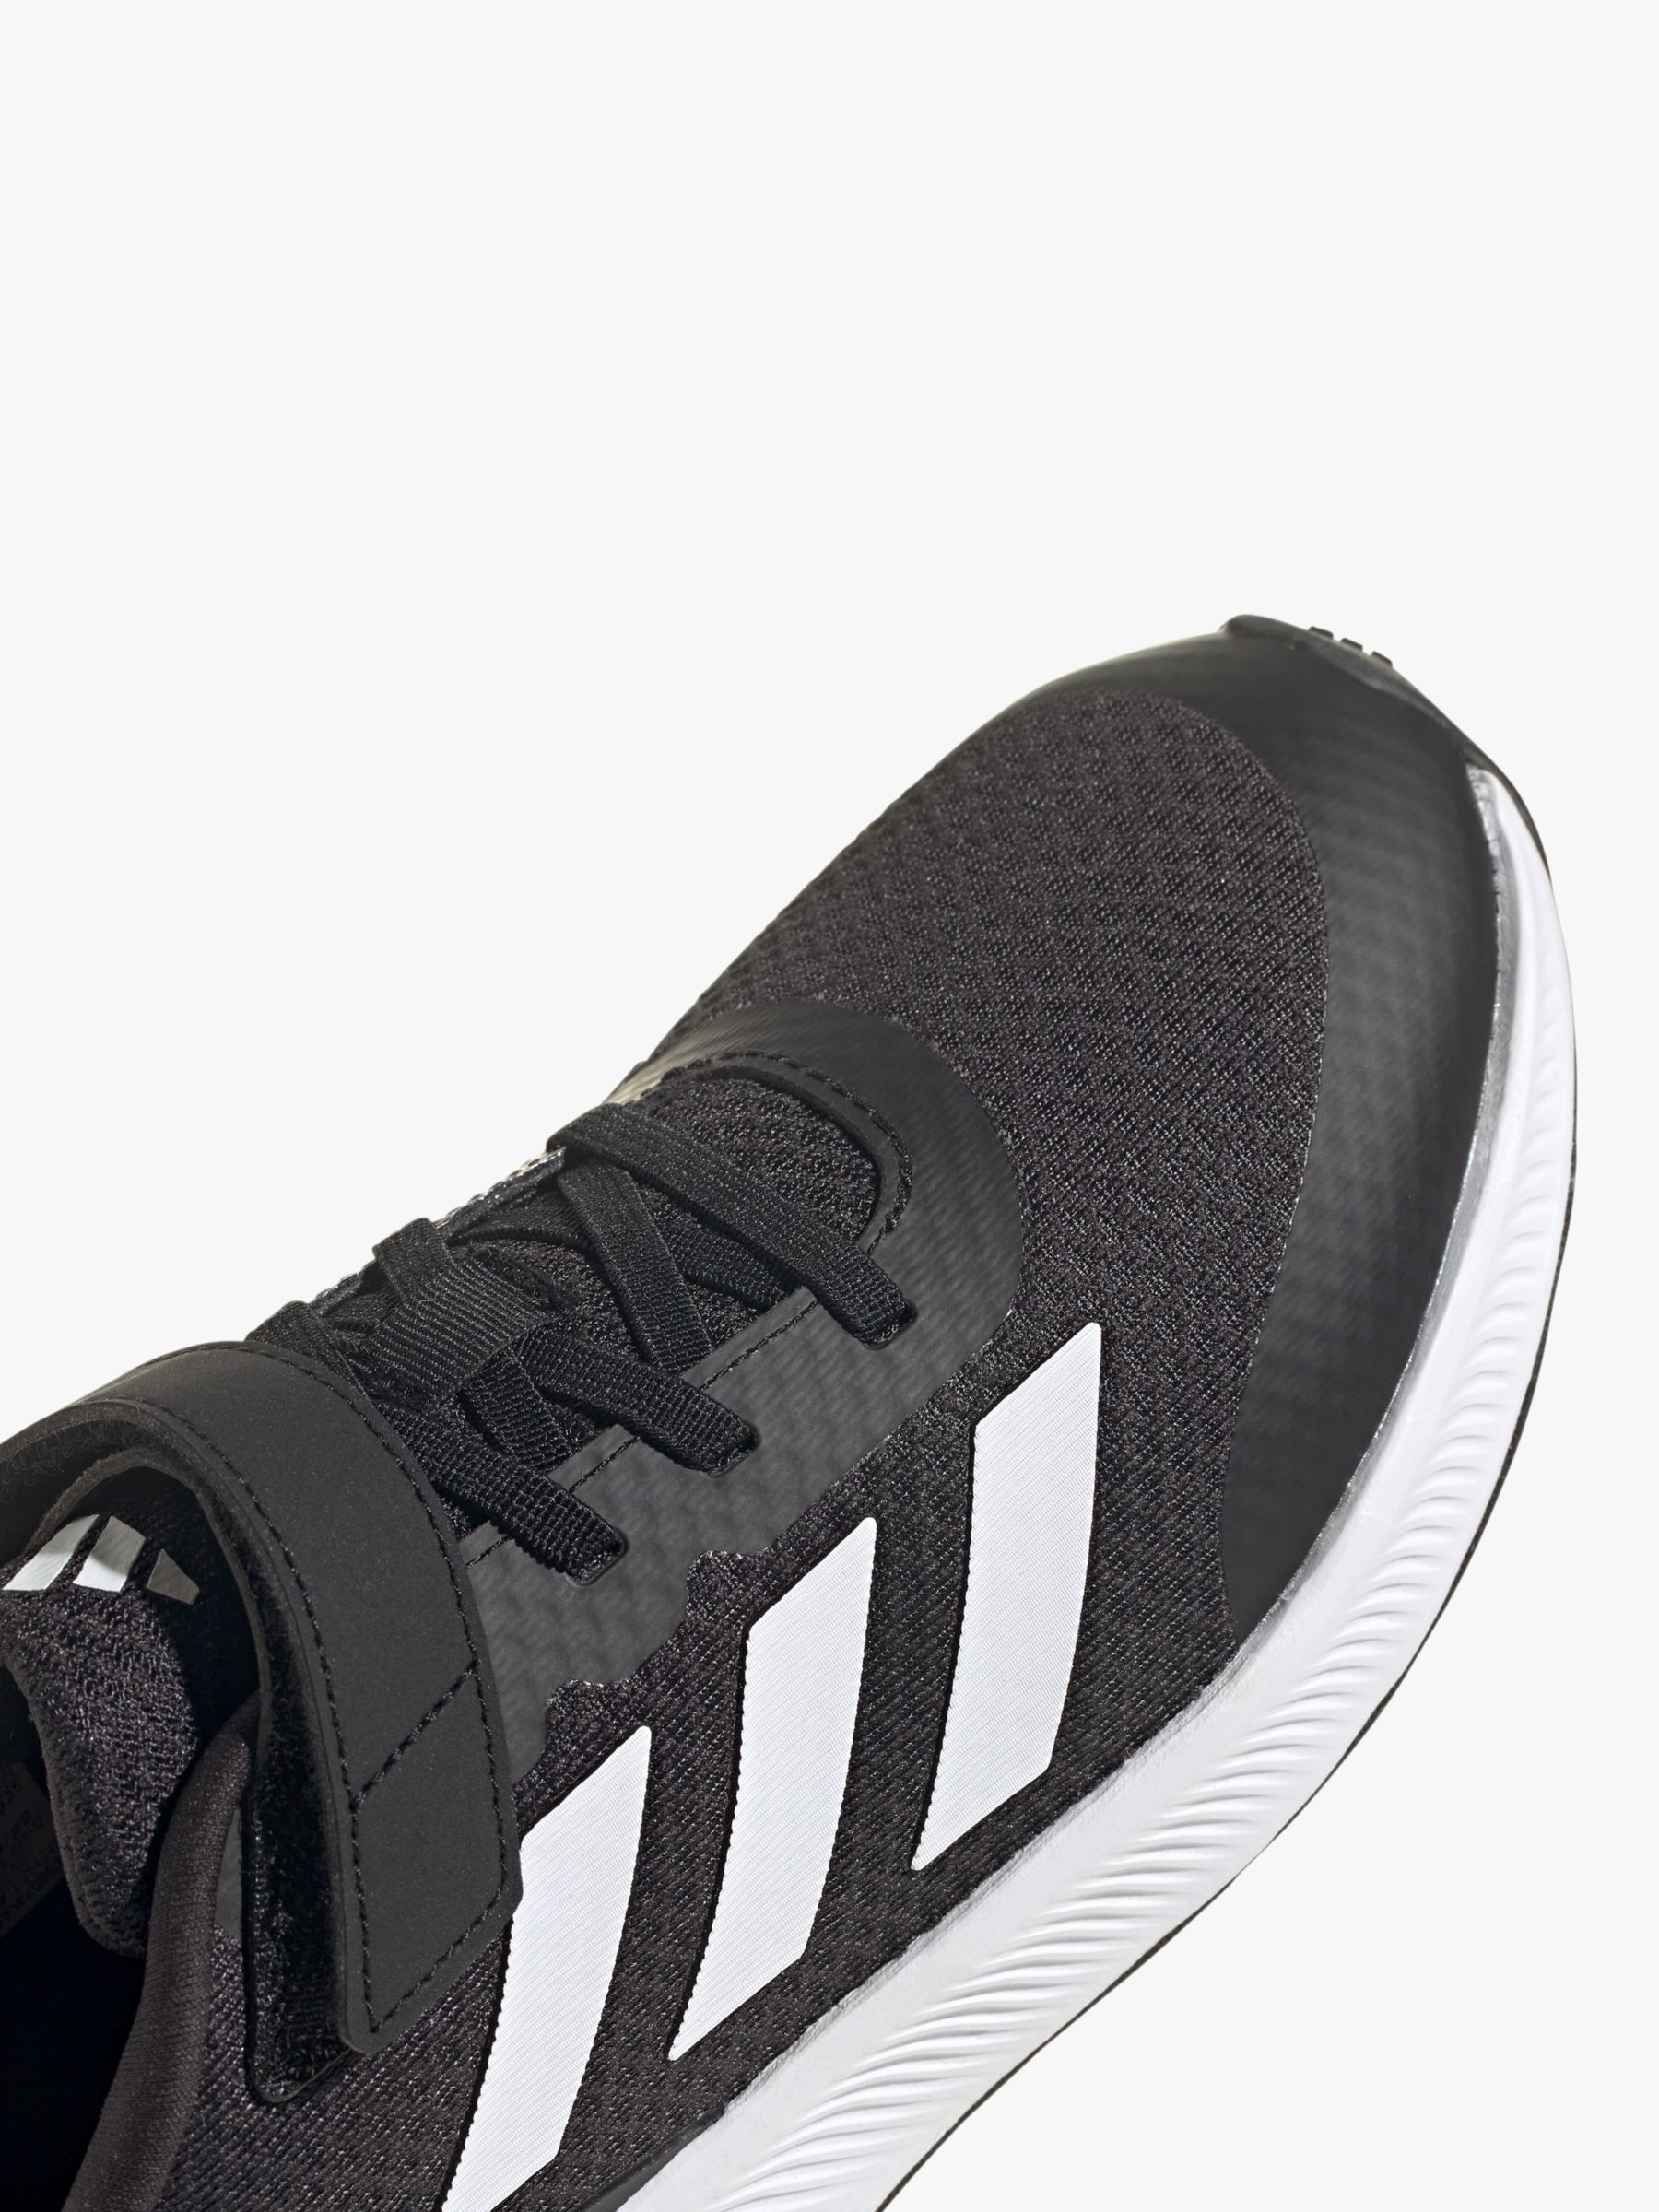 Buy adidas Kids'  Runfalcon 3.0 Trainers Online at johnlewis.com